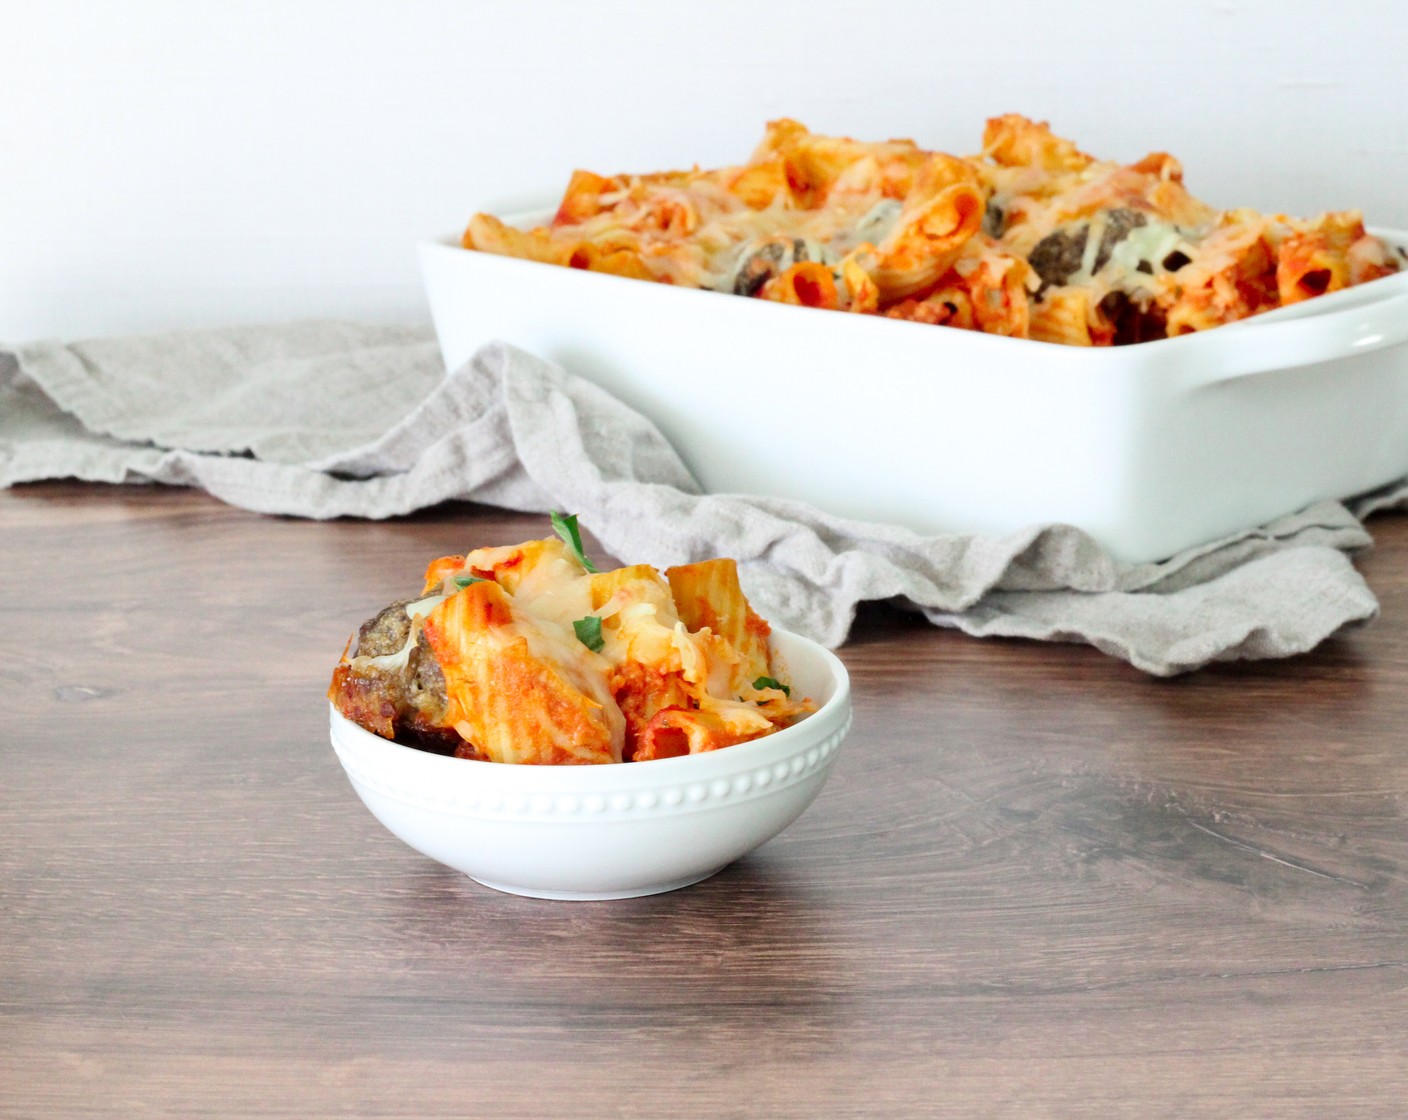 Baked Rigatoni with Meatballs